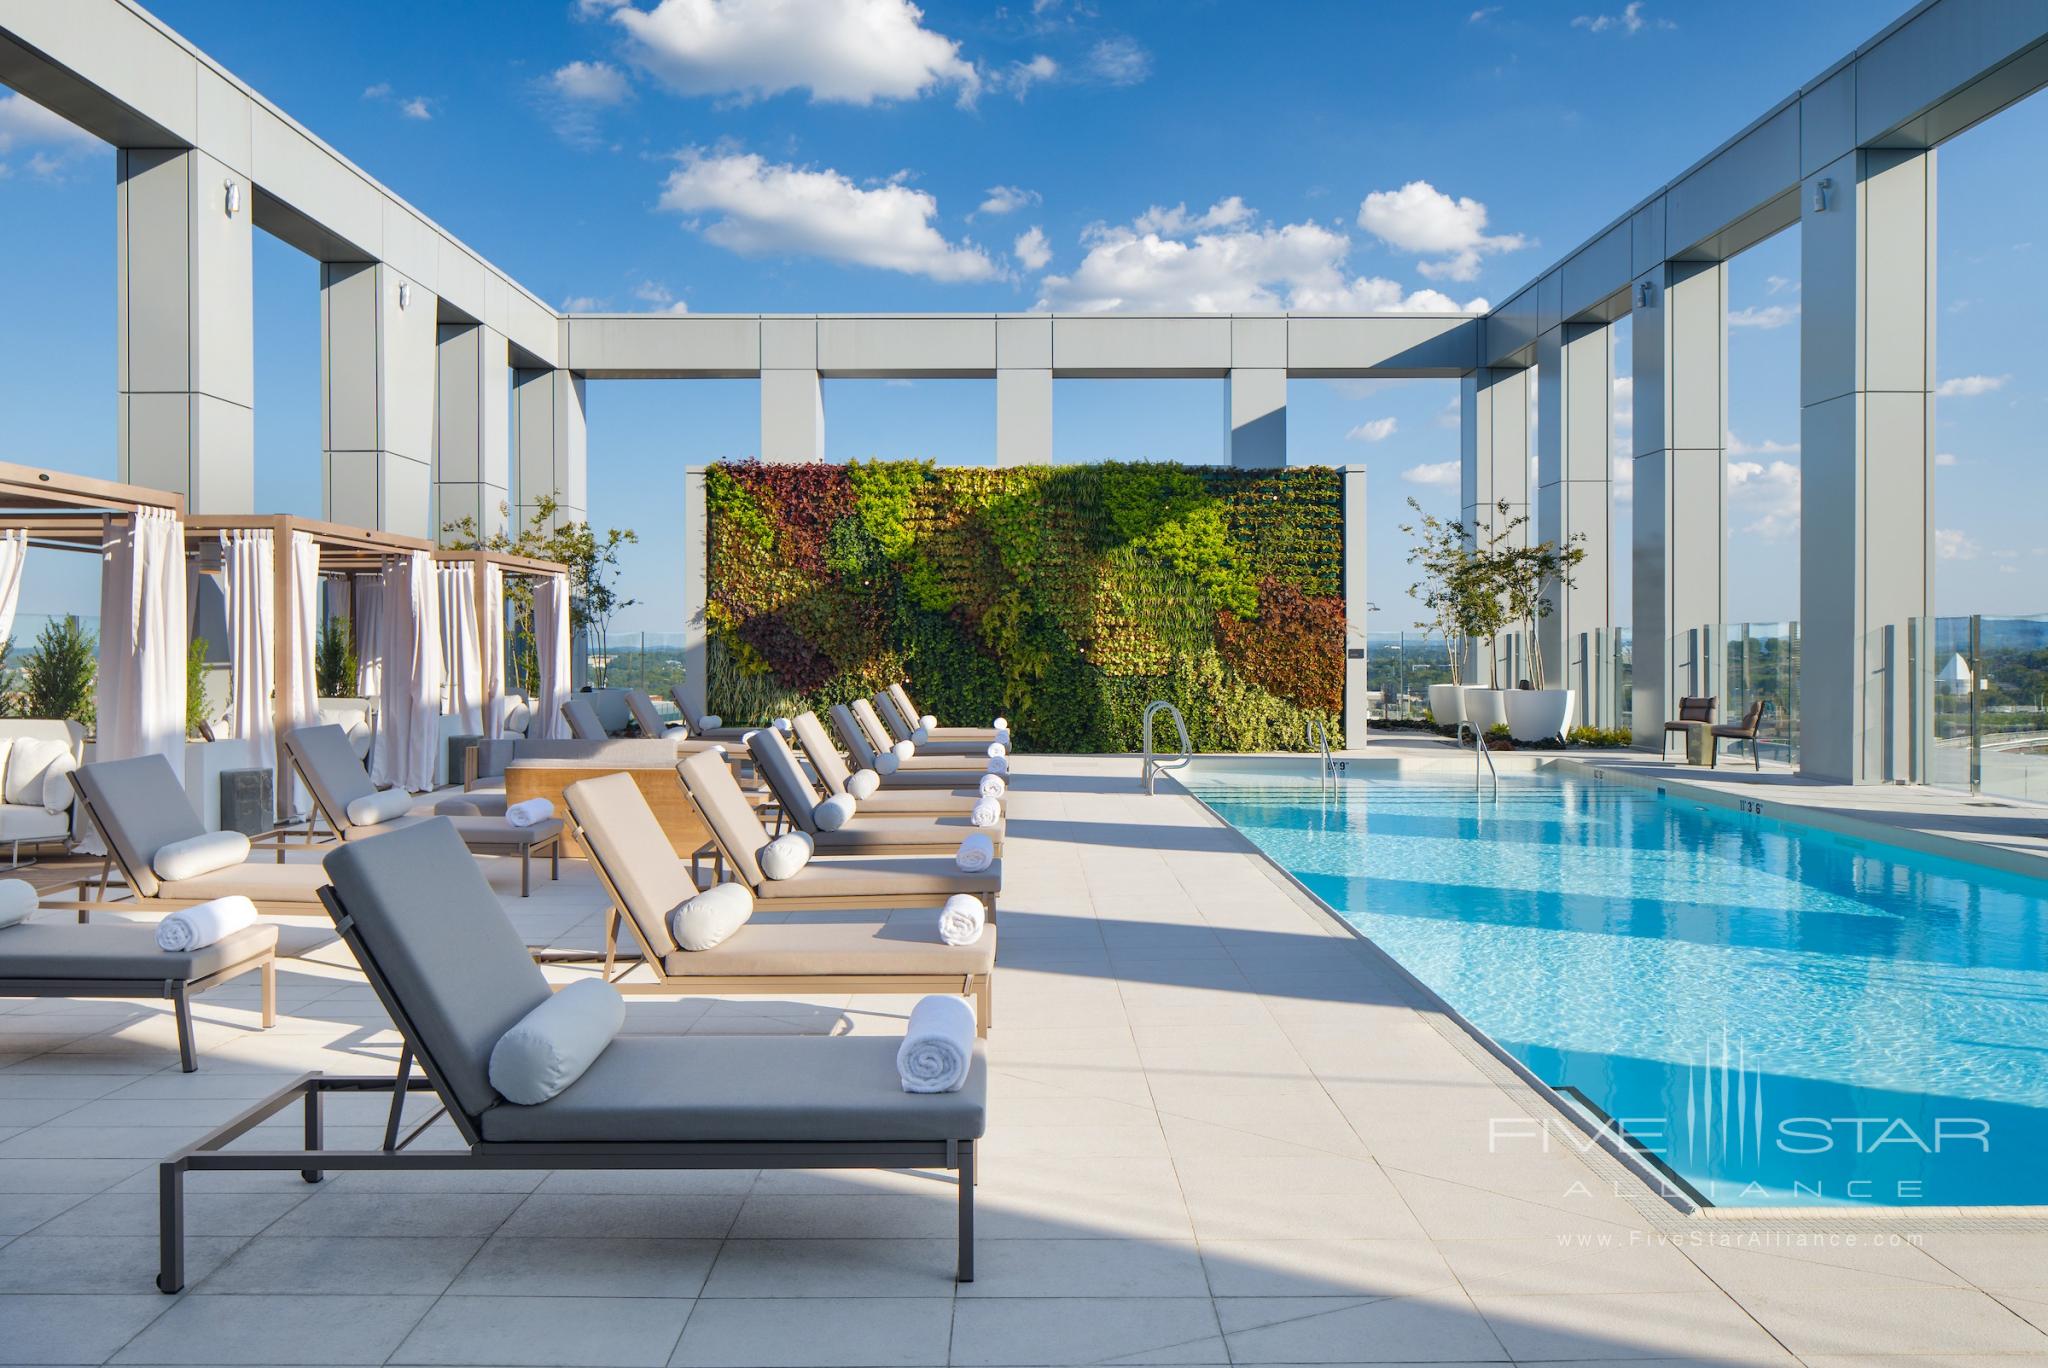 Perched on the 21st floor of The Joseph in Nashville the rooftop oasis features a 50-foot pool, plush lounge chairs, private cabanas, a living green wall, and a restaurant and bar named Denim, serving American fare with skyline views.